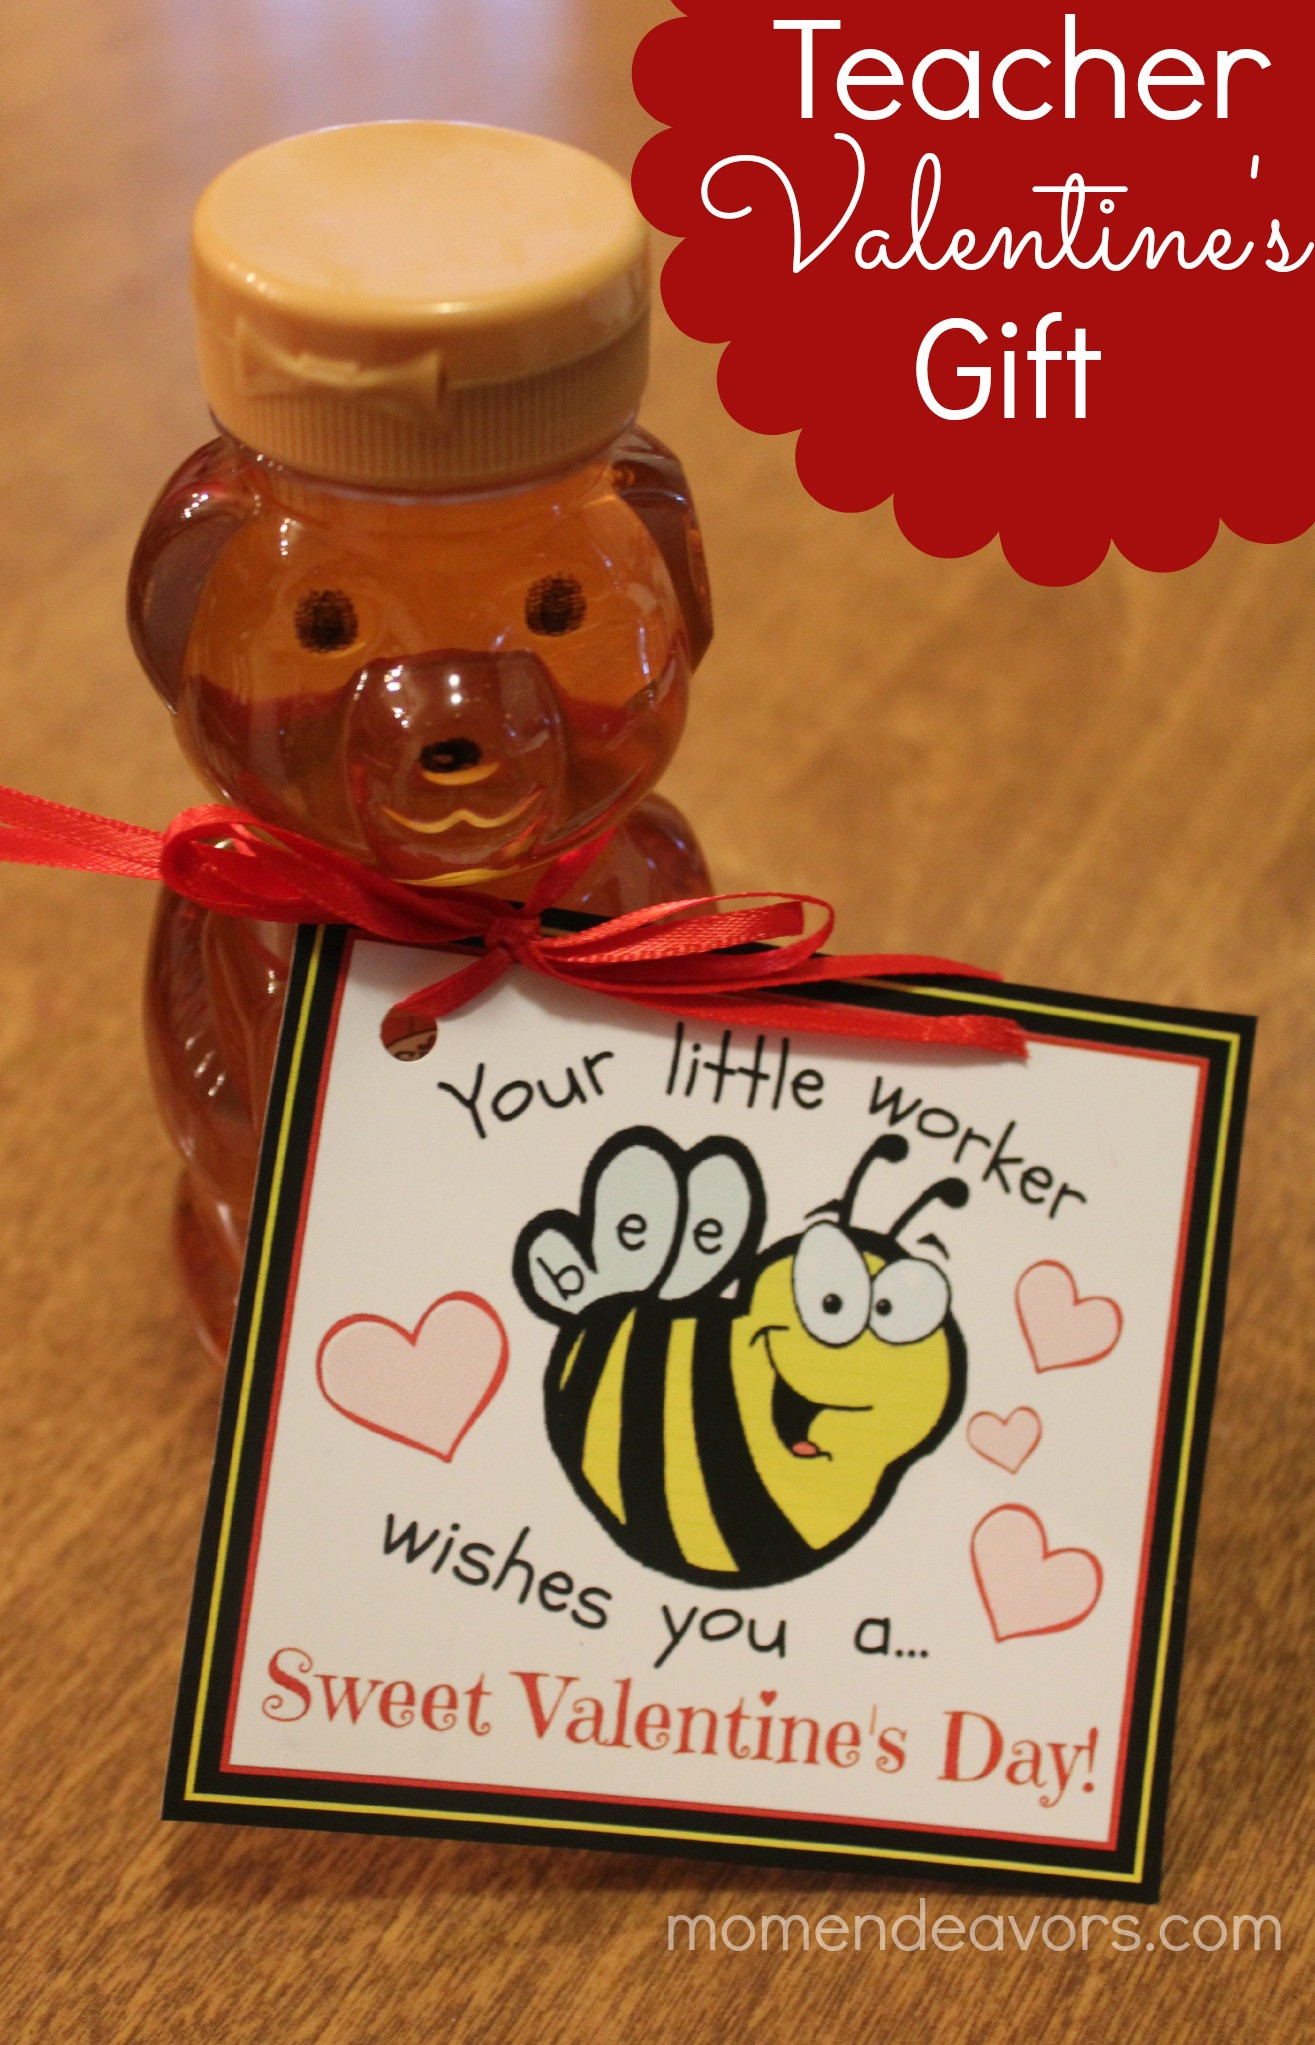 Valentines Gift Ideas for Teachers Awesome Bee themed Teacher Valentine’s Gift